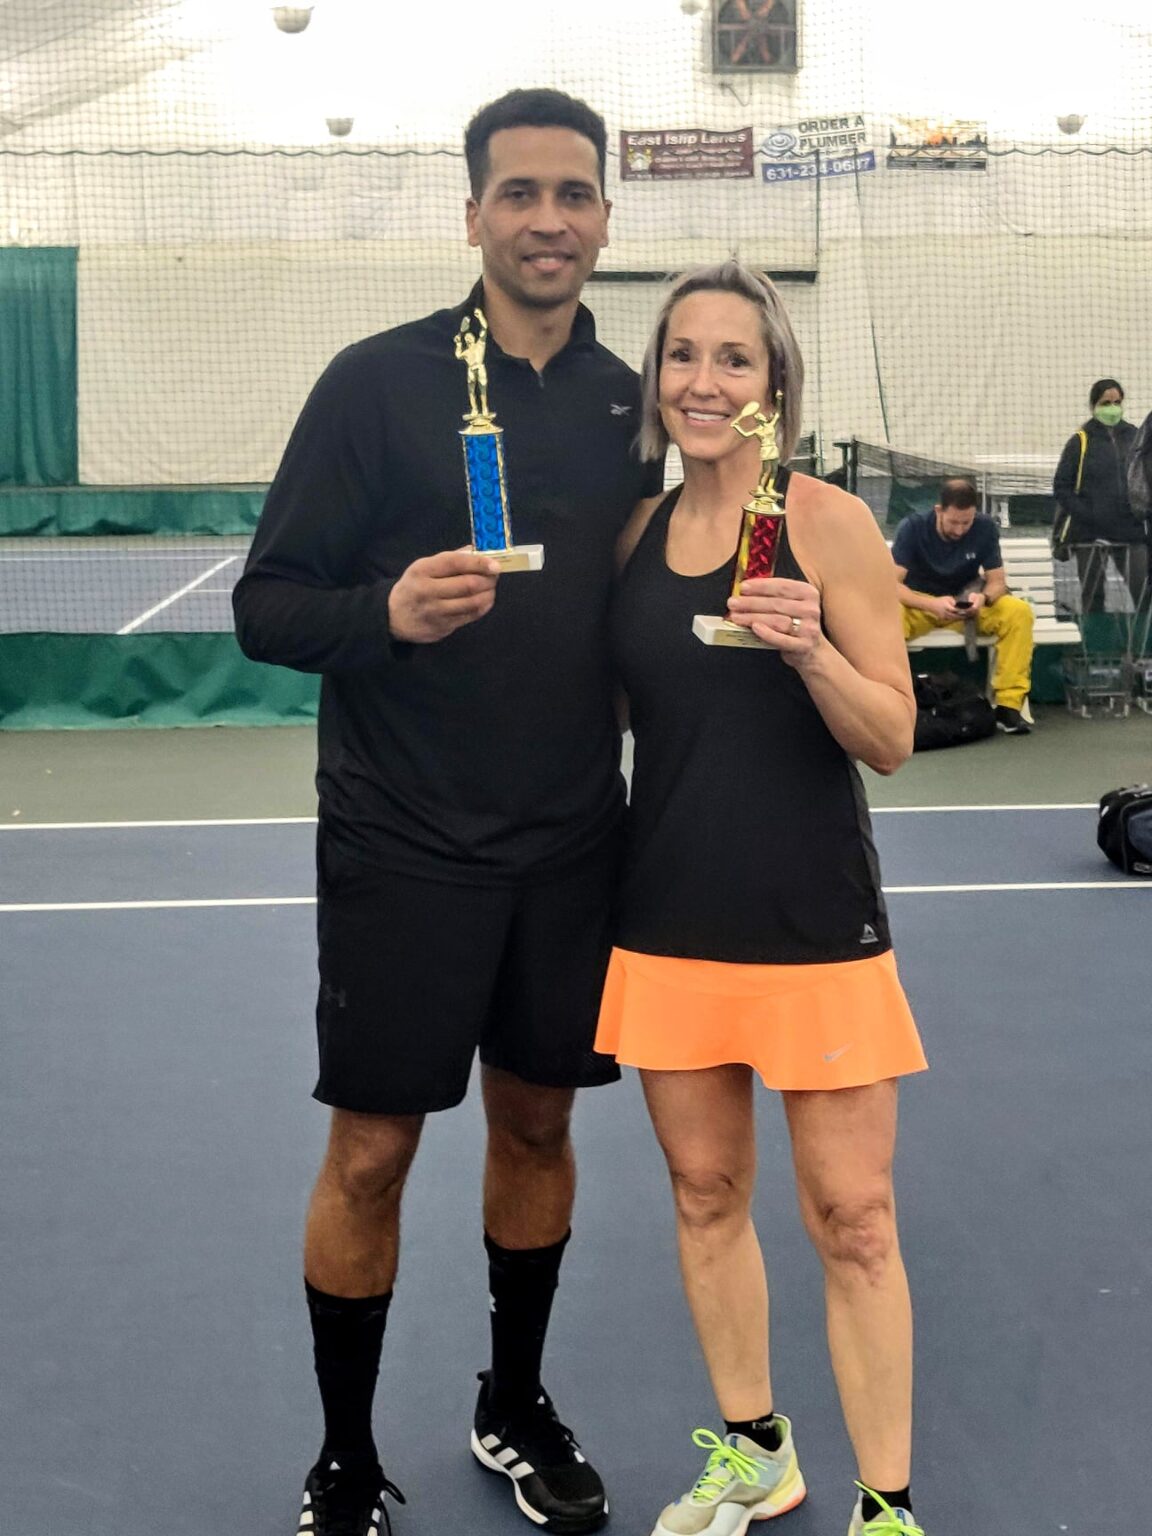 Congratulations to the Winners of Mixed Doubles Tournament 